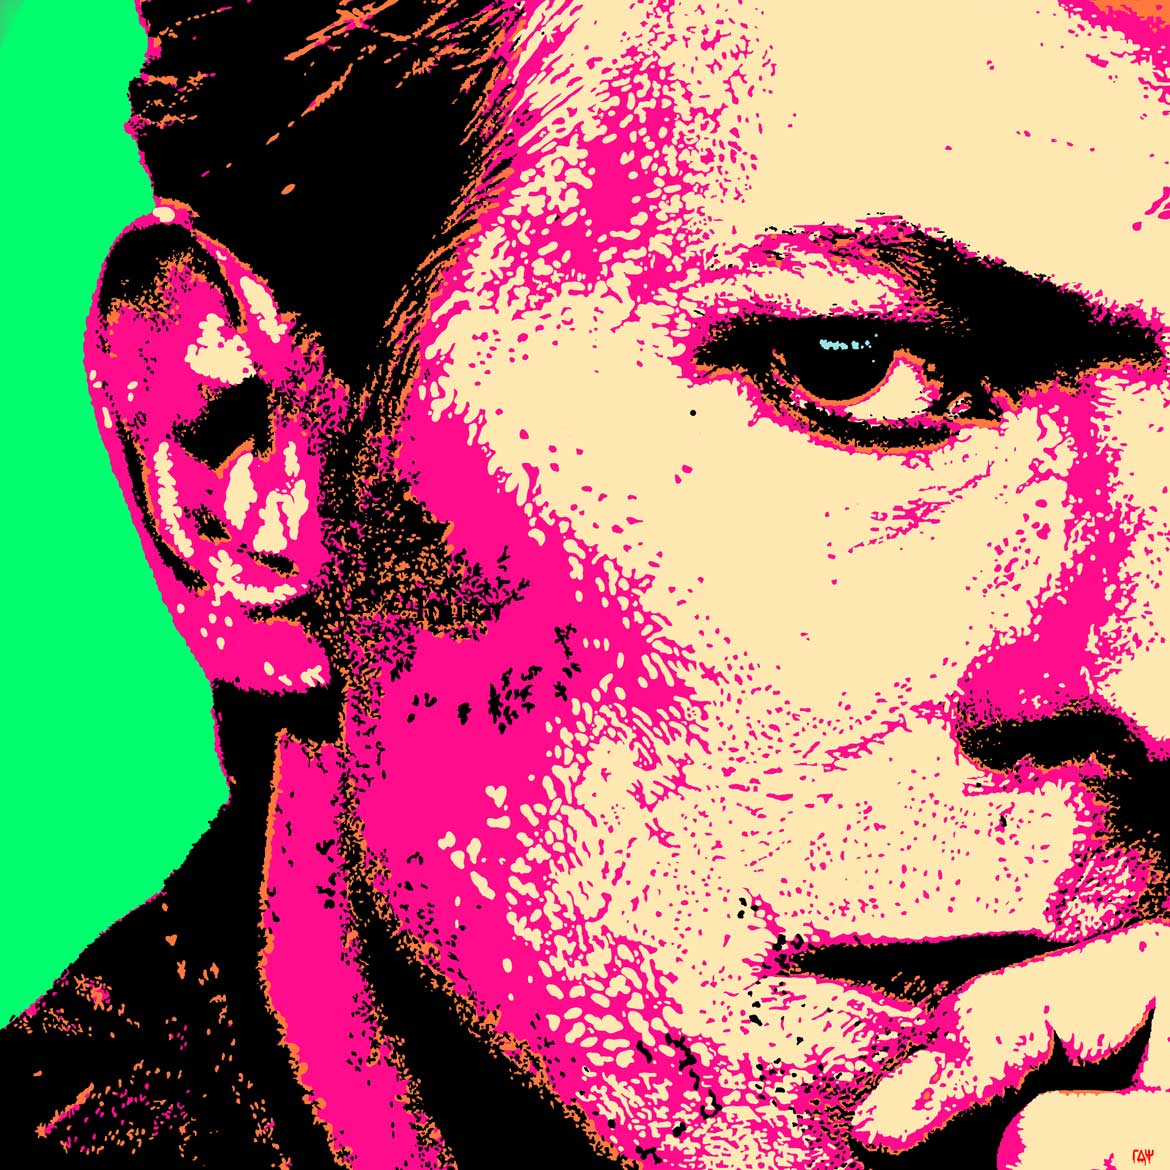 DAVID BOWIE ON GREEN